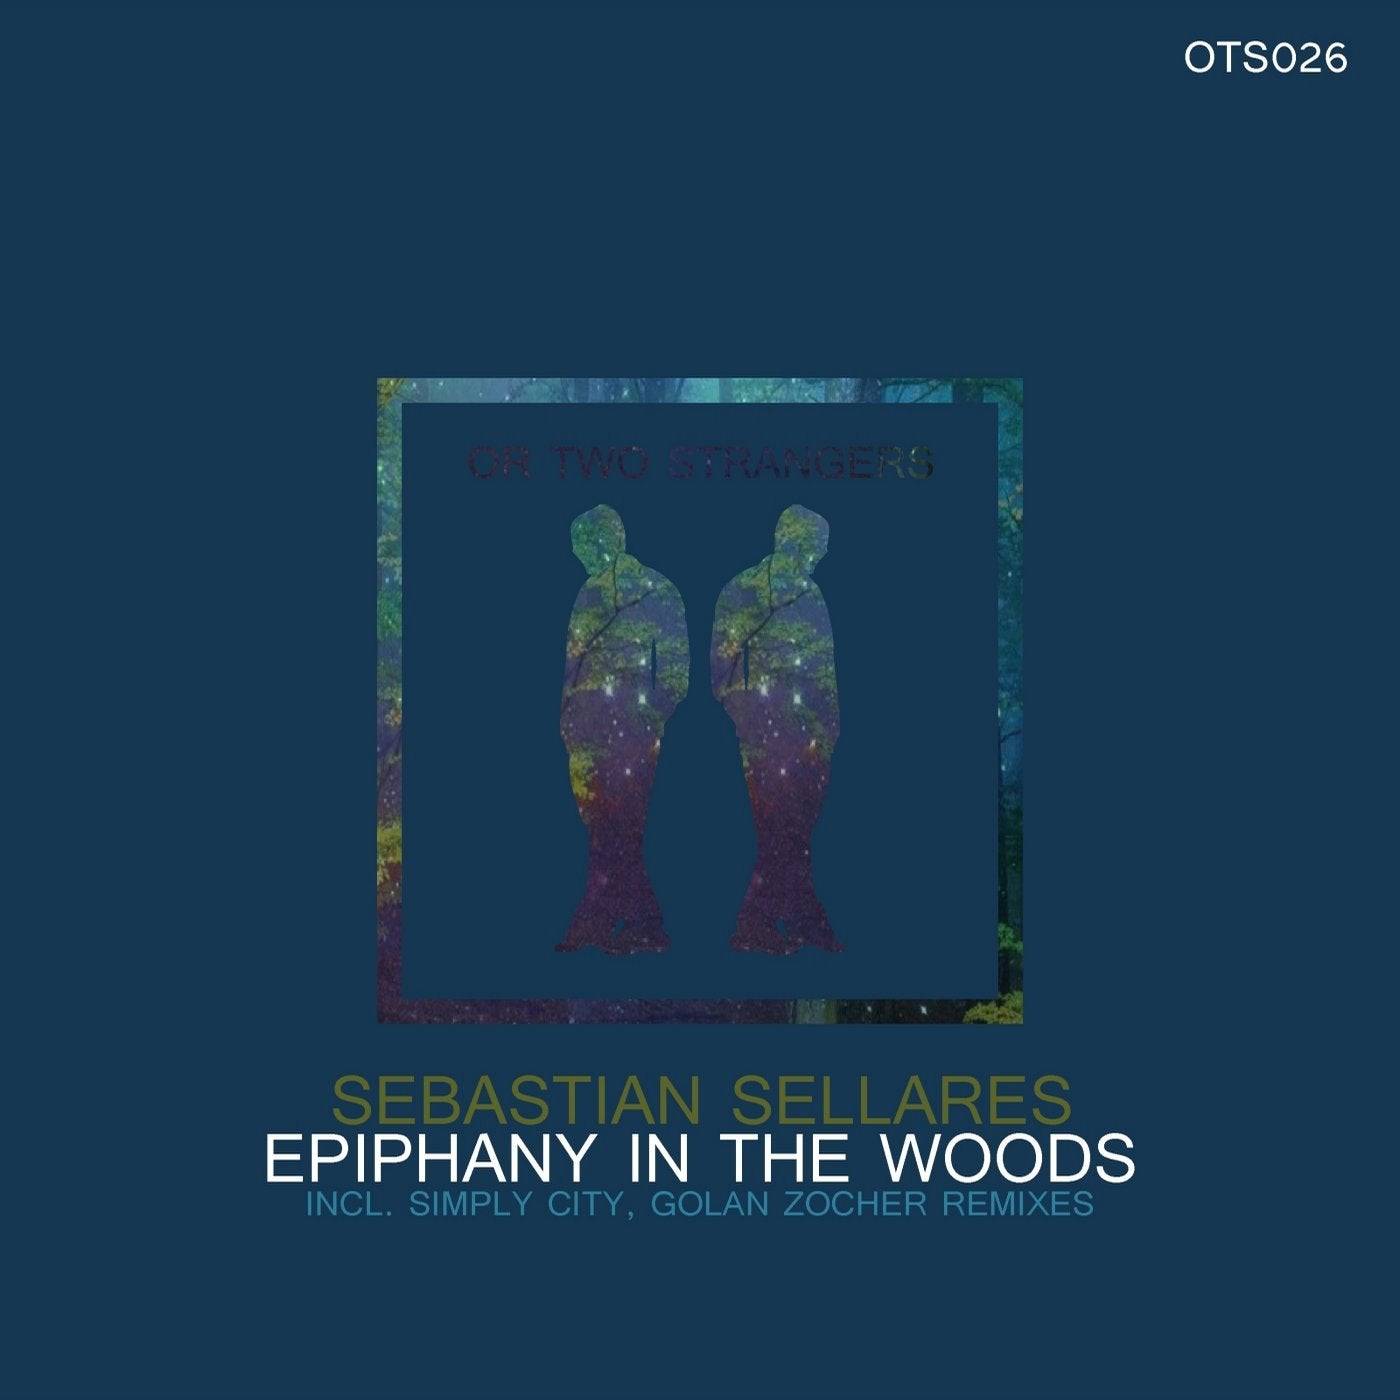 Epiphany in the Woods